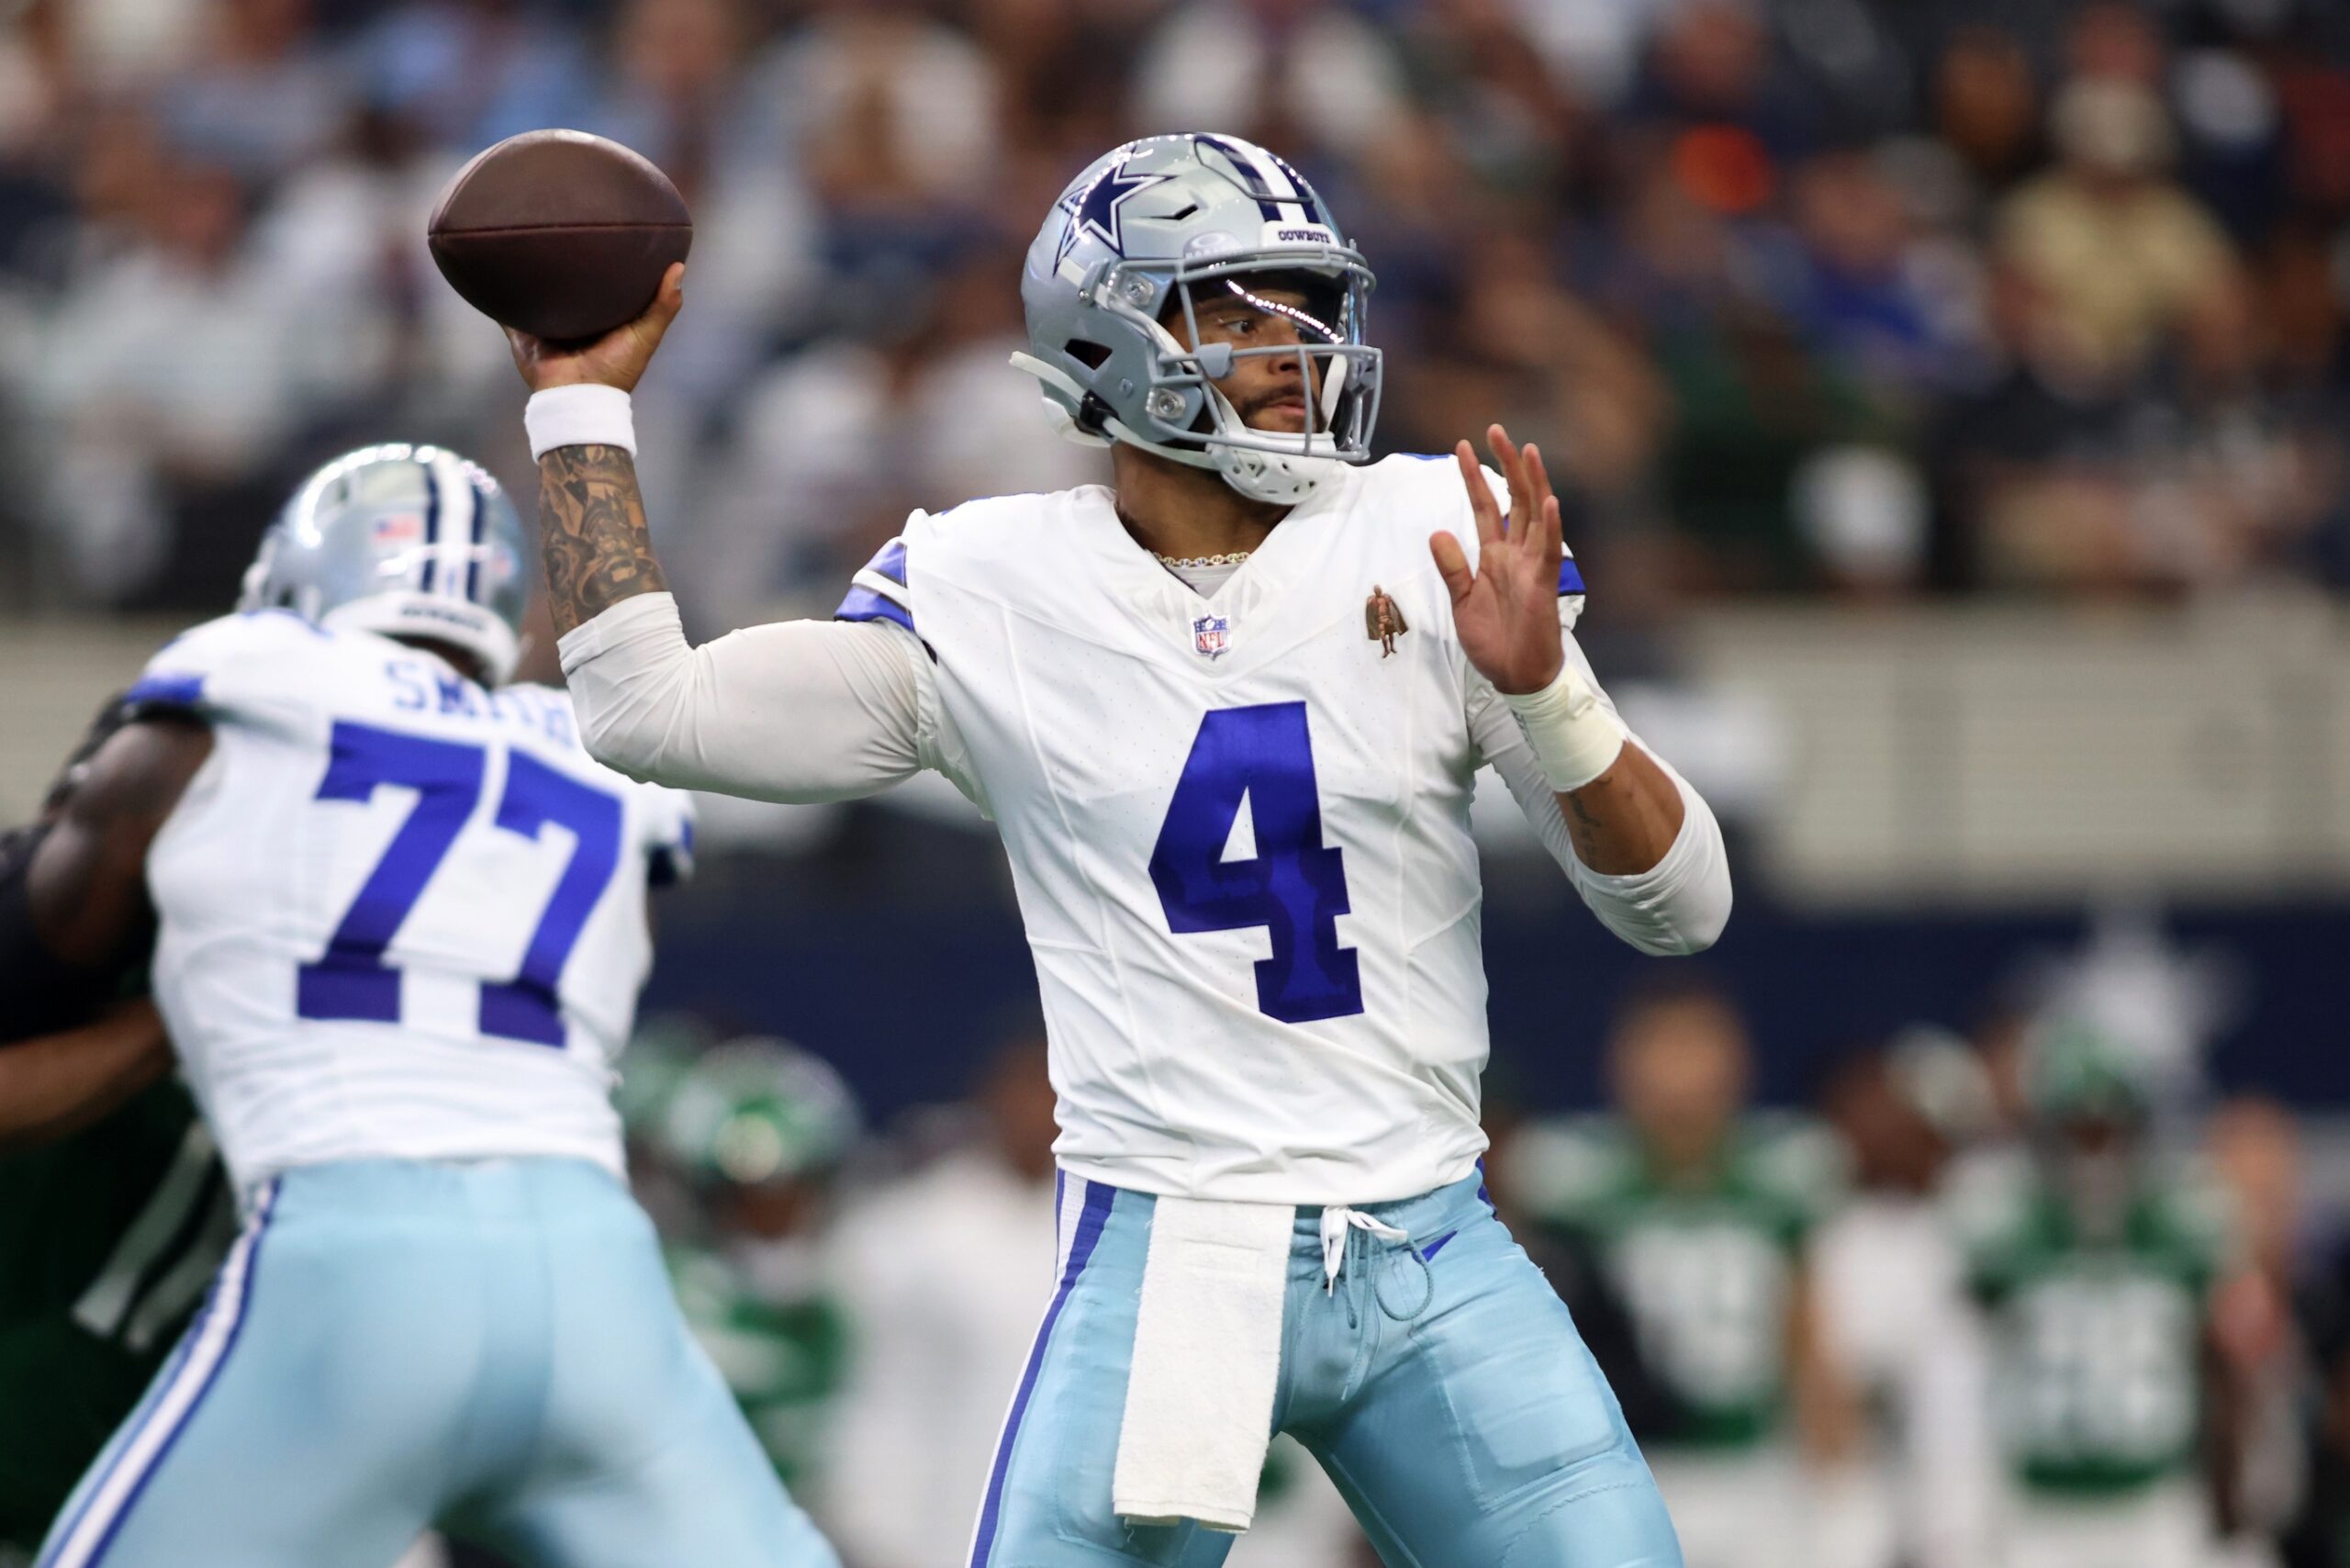 Dak Prescott (4) throws a pass in the first quarter against the New York Jets at AT&T Stadium.